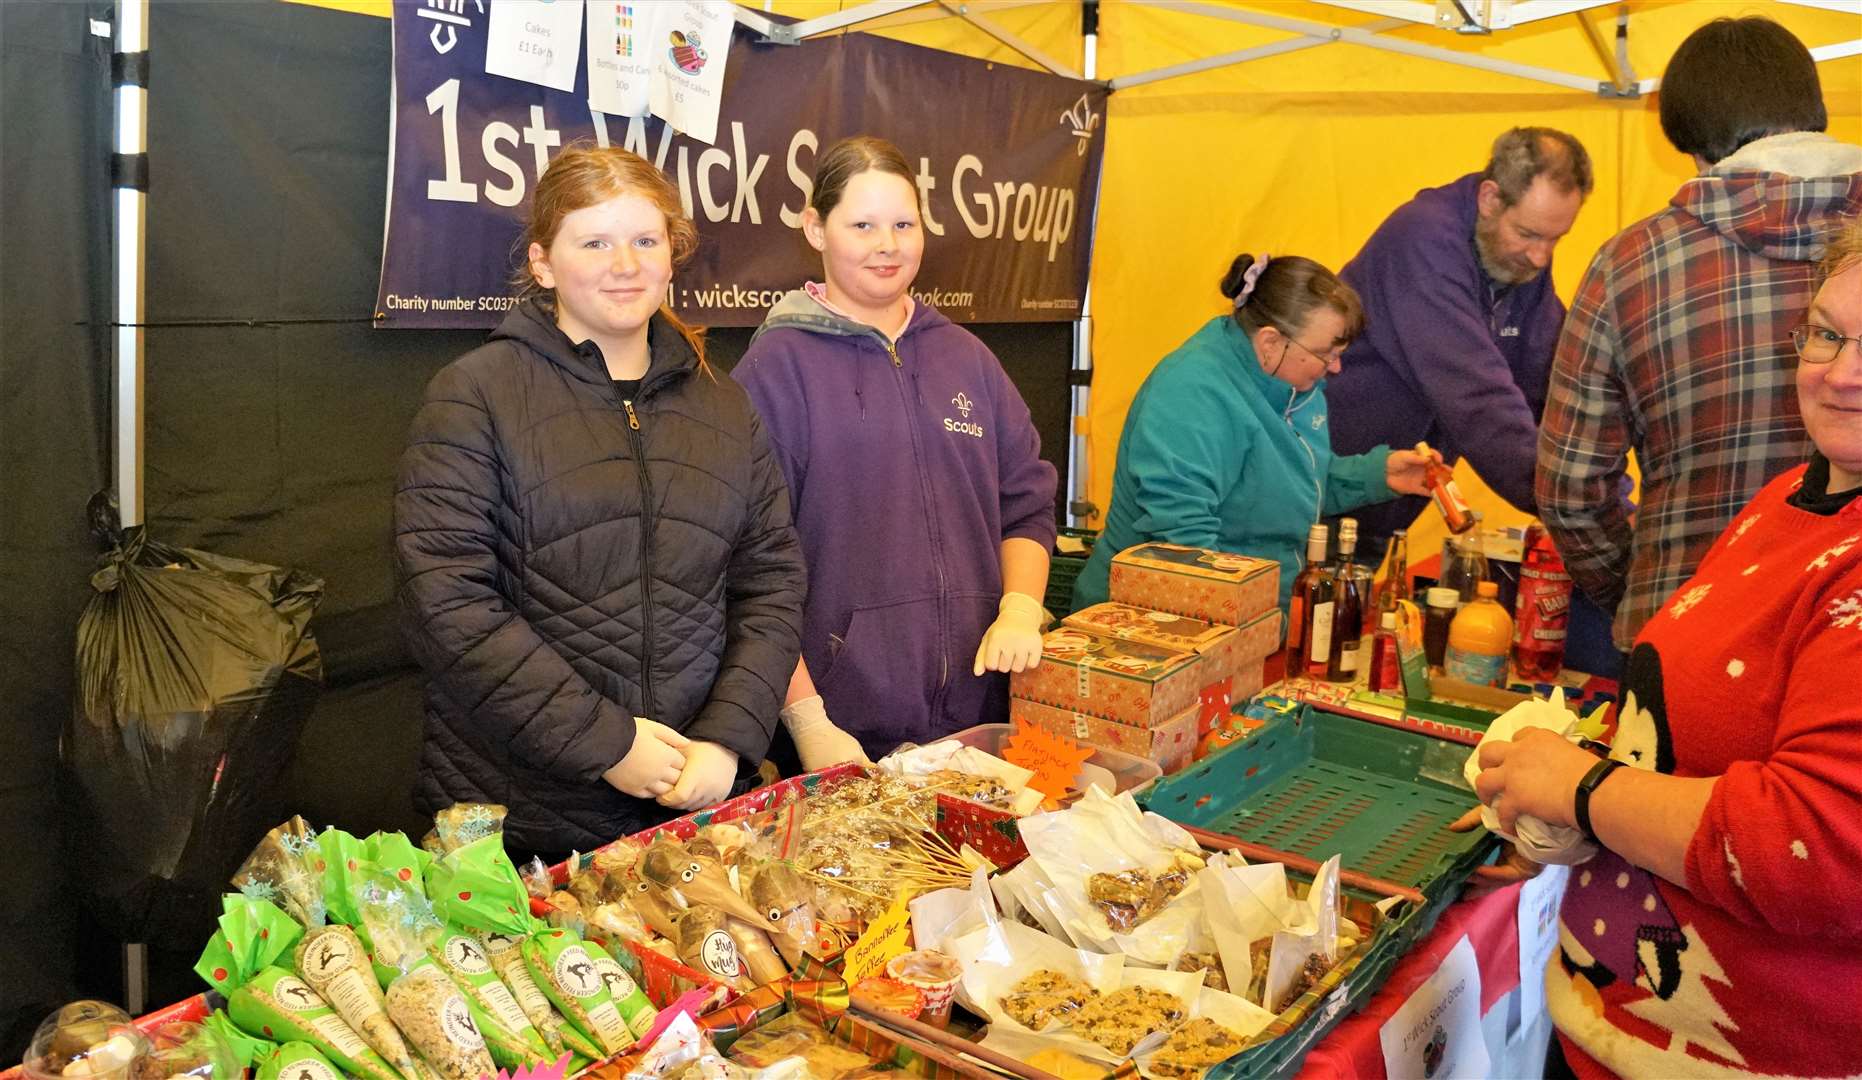 The 1st Wick Scout Group stall. Picture: DGS